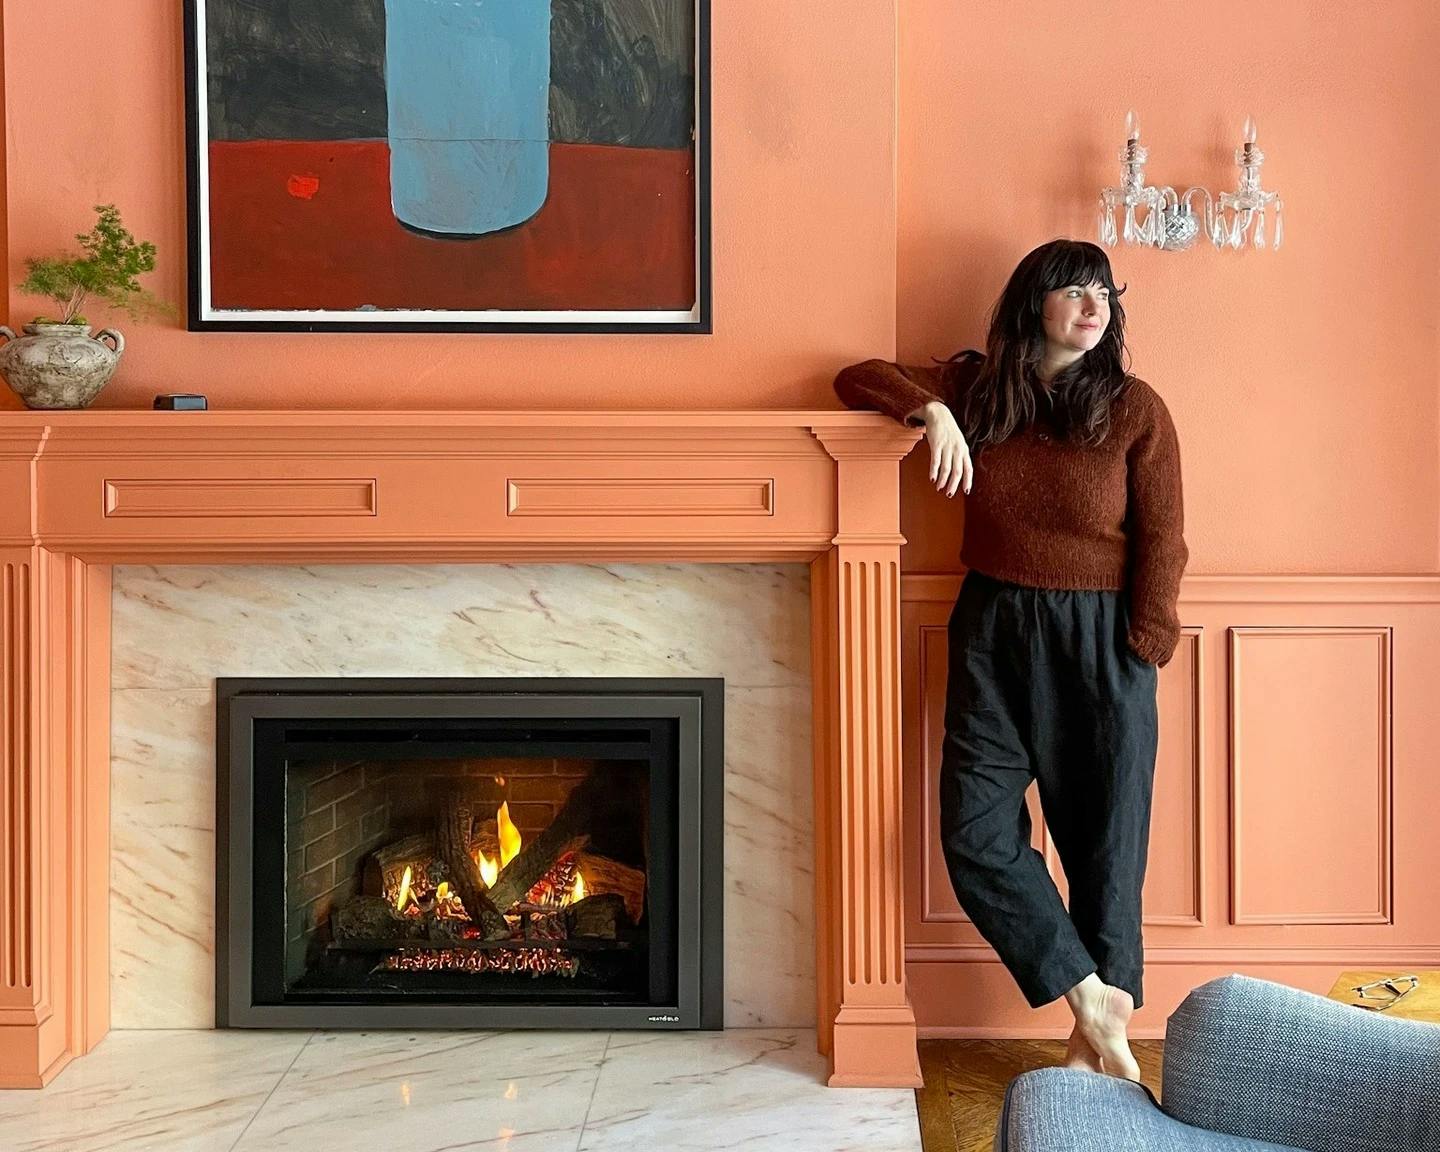 Kate Arends of Wit and Delight leaning against a fireplace mantle in a bright orange-colored living room.